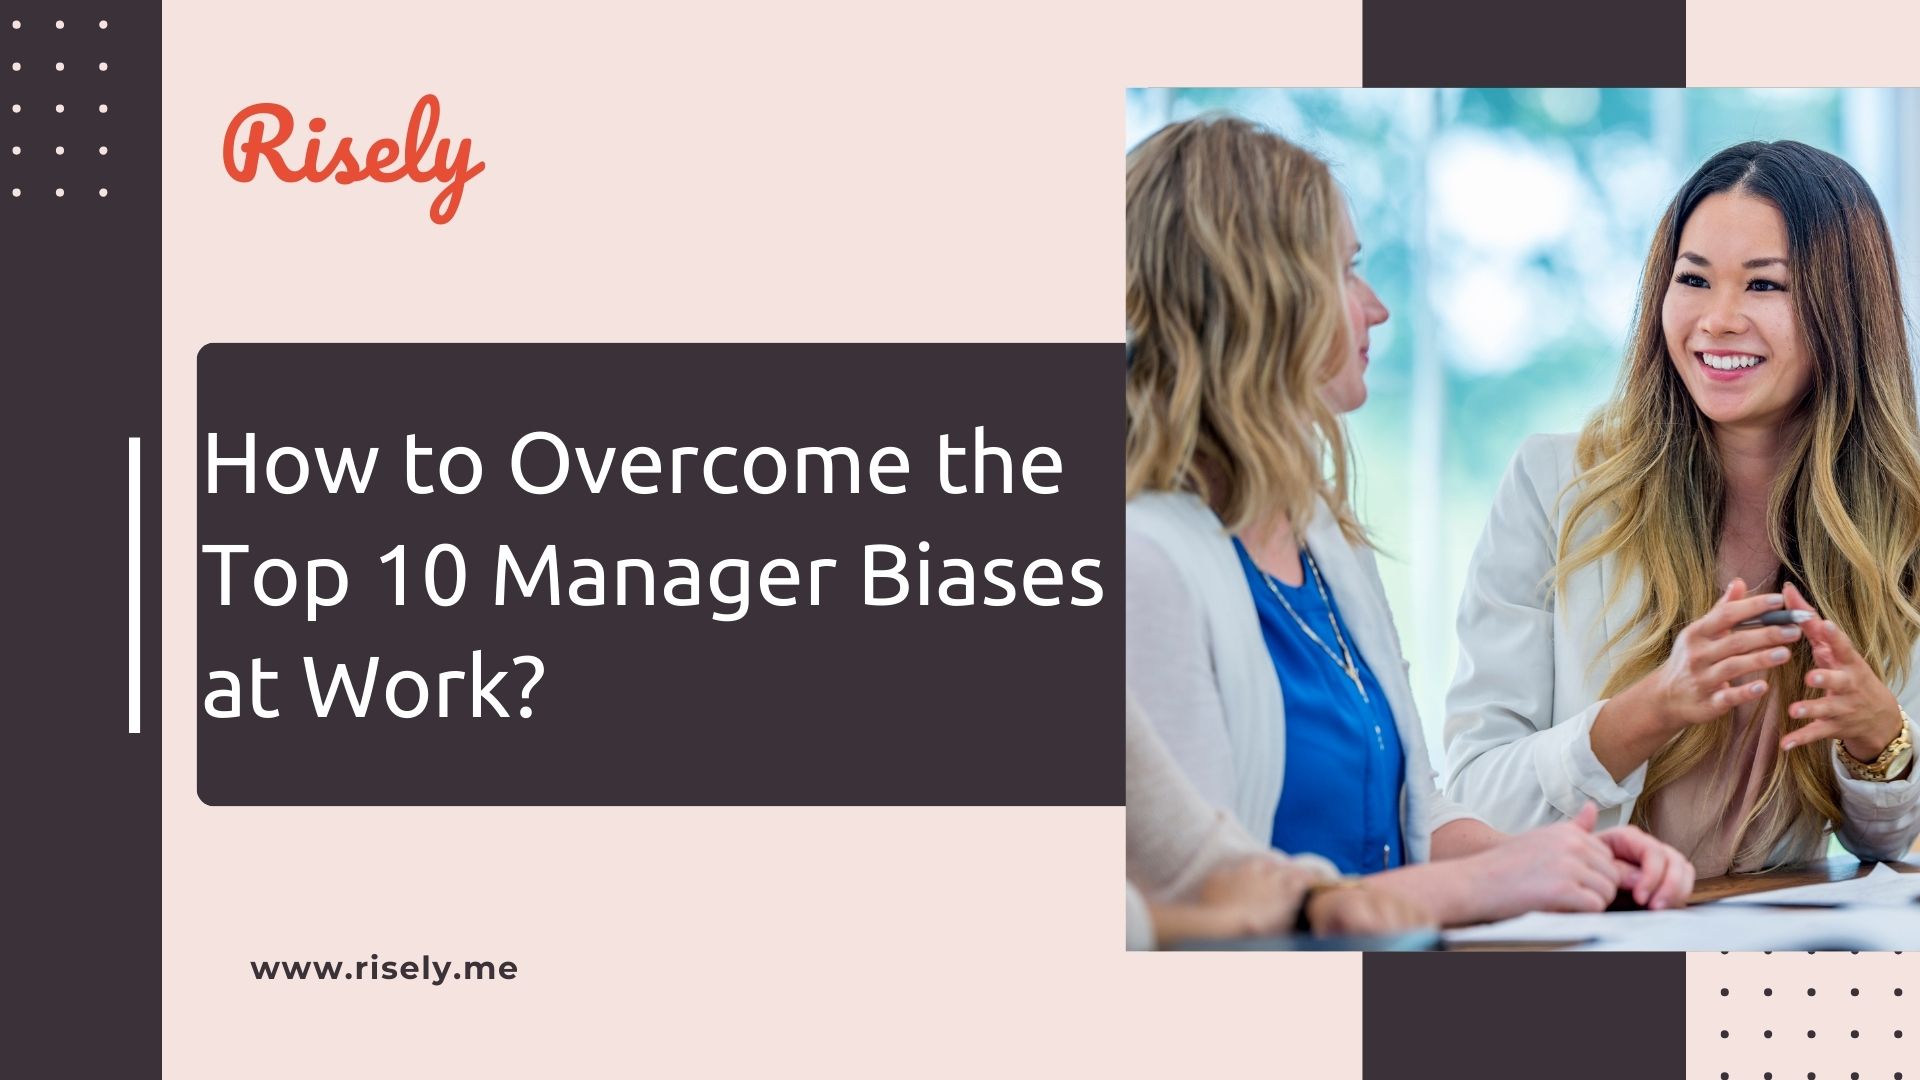 How to Overcome the Top 10 Manager Biases at Work?